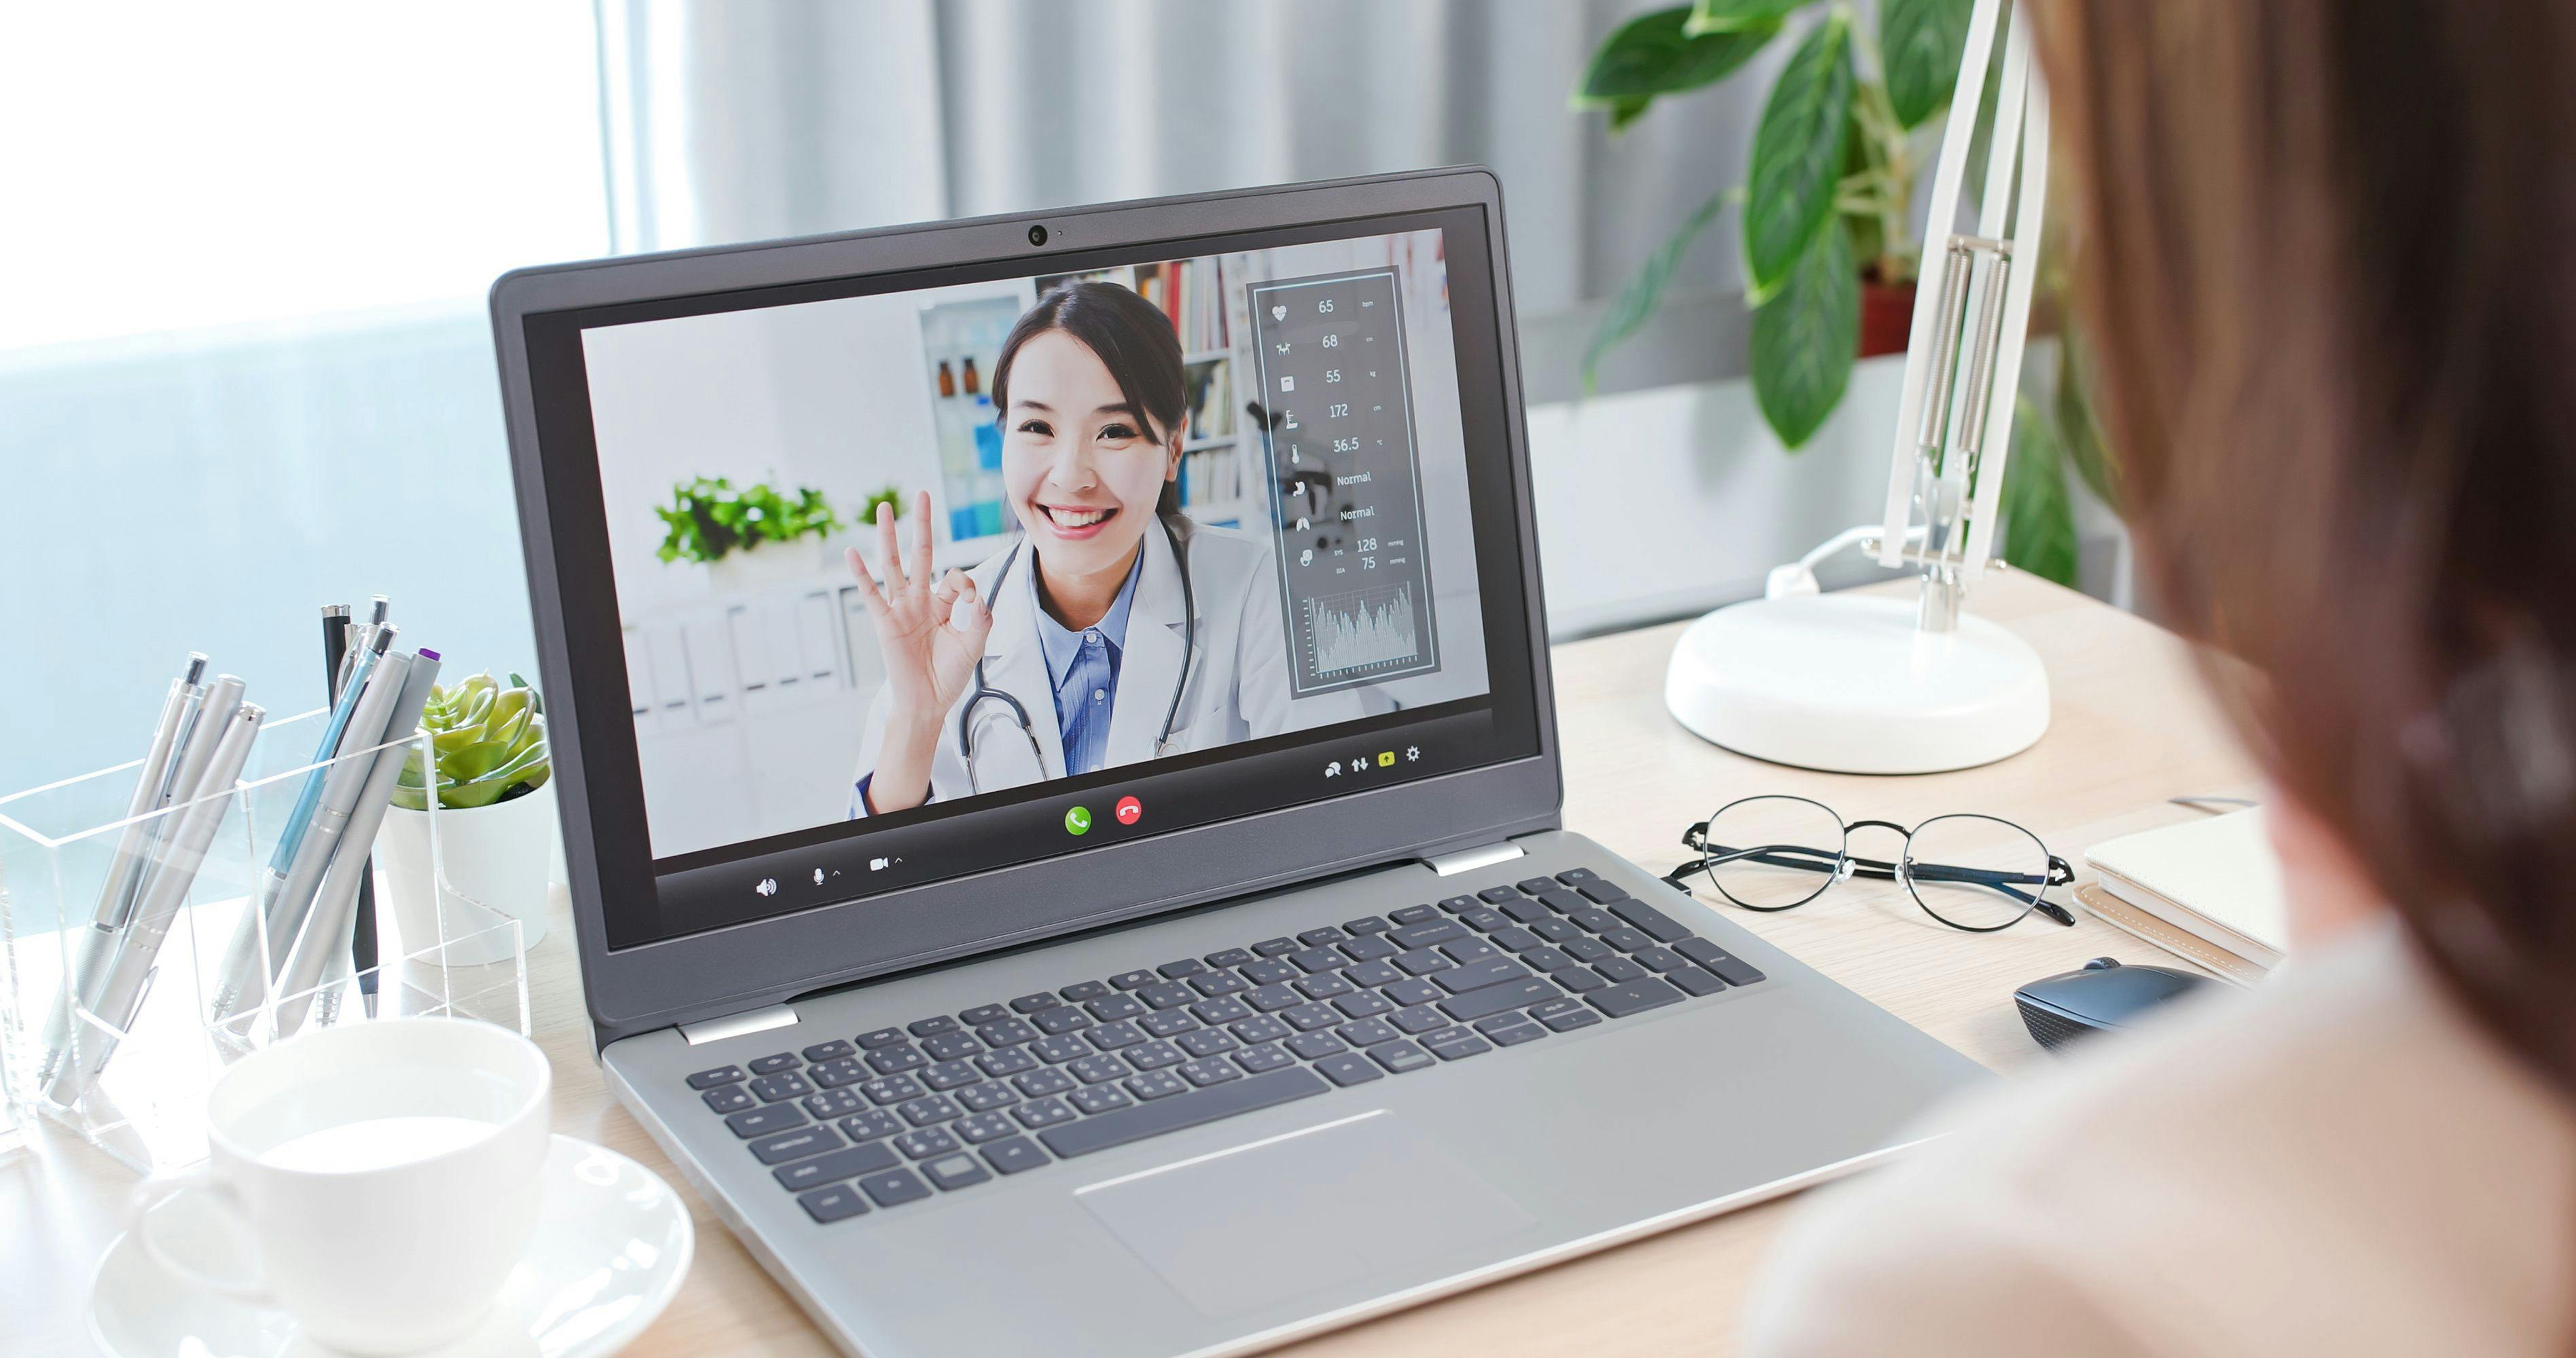 Is Telehealth on Par with In-Person Risk Adjustment Assessments?